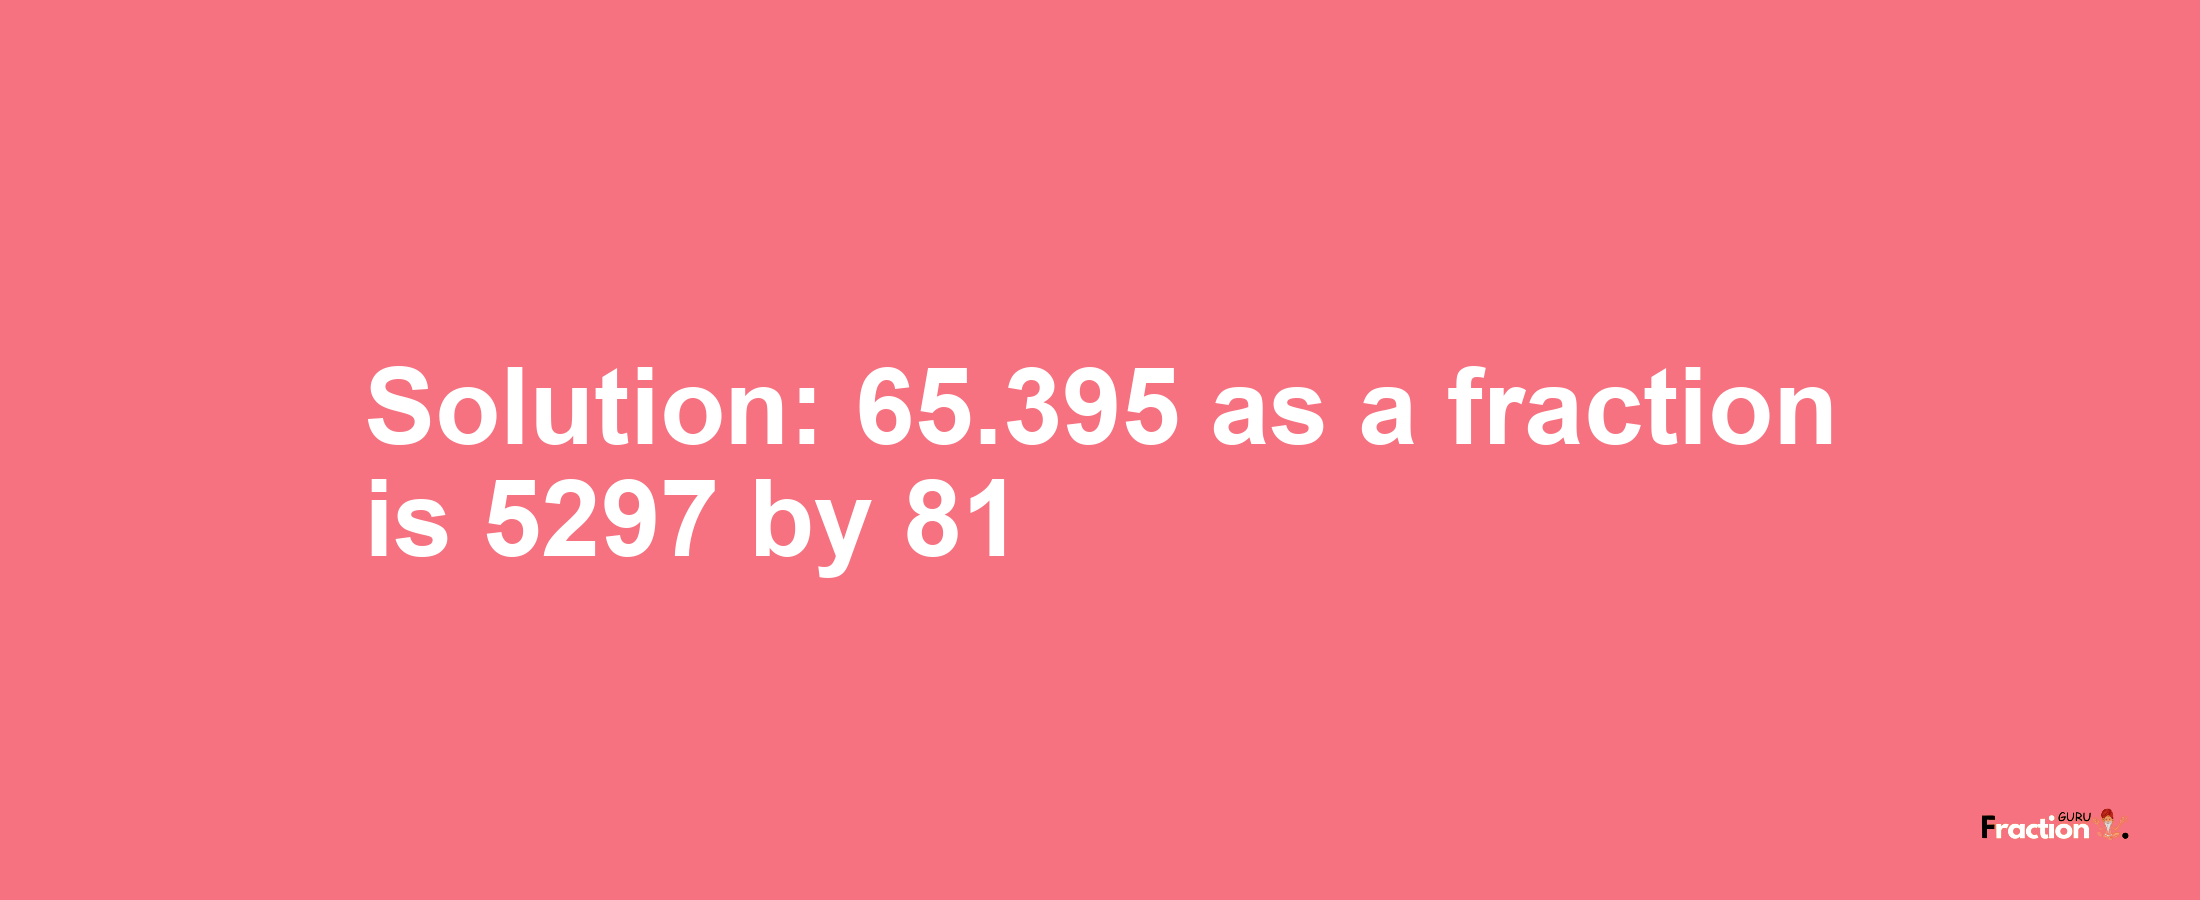 Solution:65.395 as a fraction is 5297/81